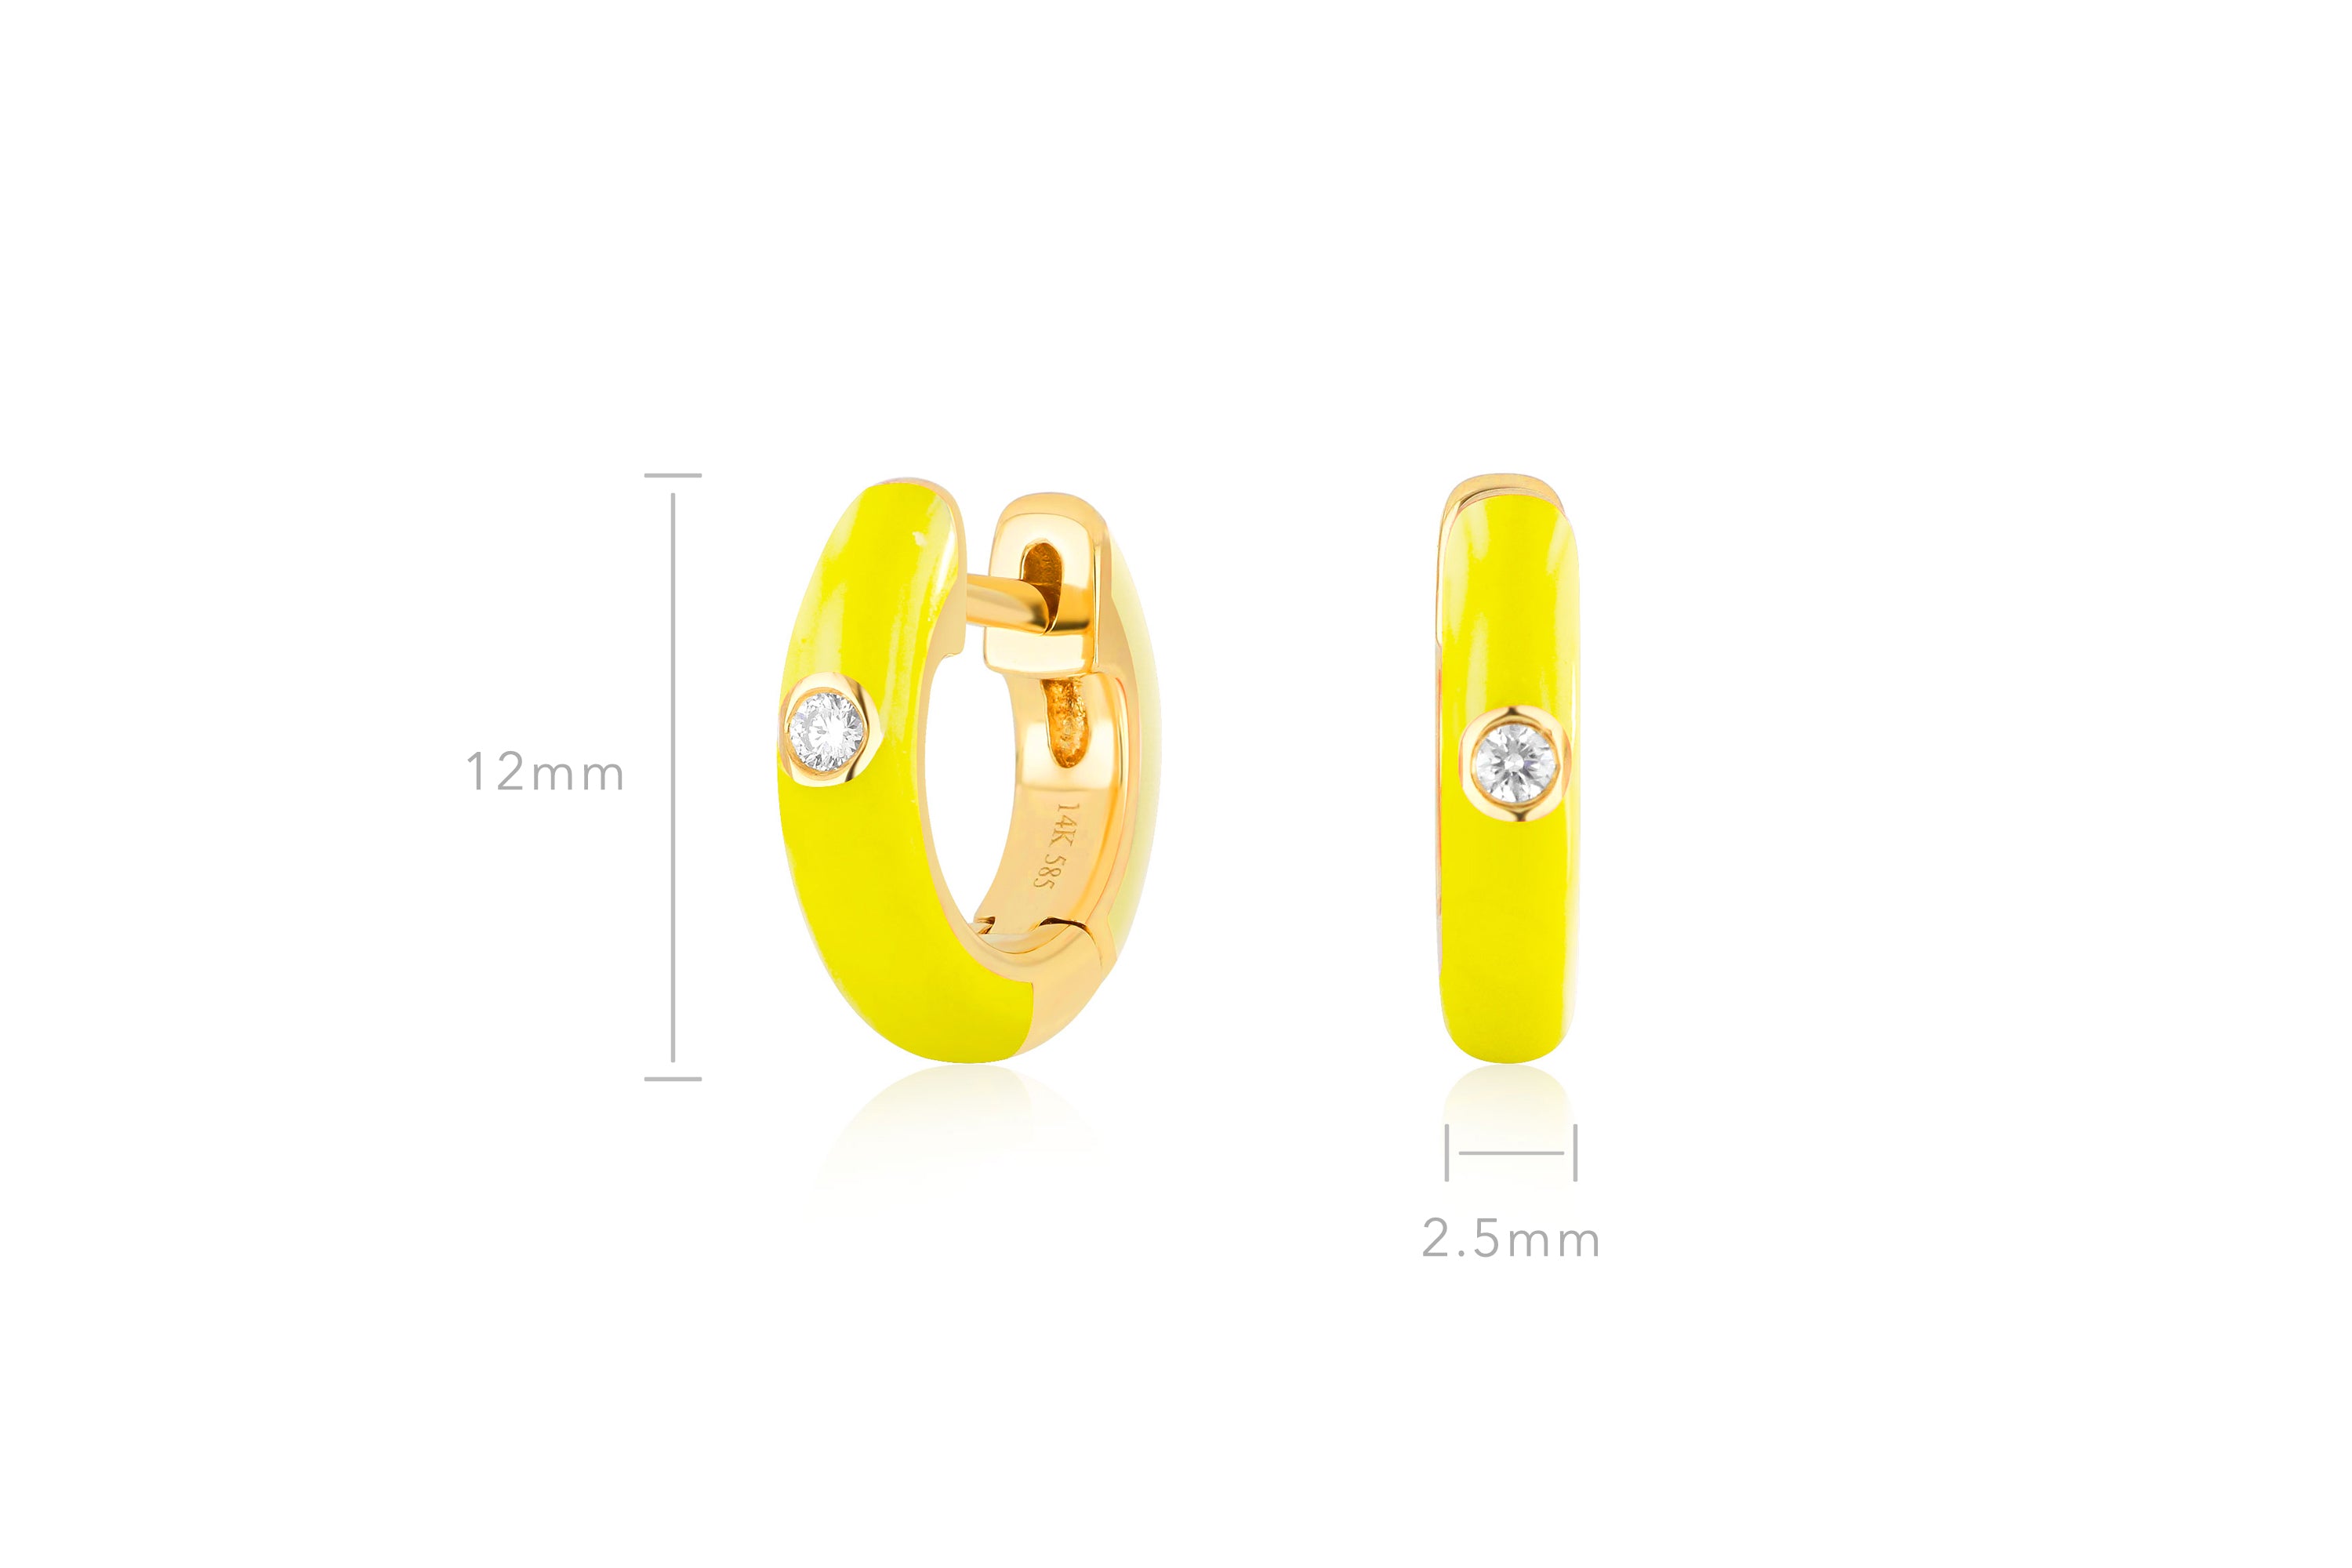 Diamond Yellow Enamel Huggie Earring in 14k yellow gold with size measurement of 12mm height and 2.5mm diameter